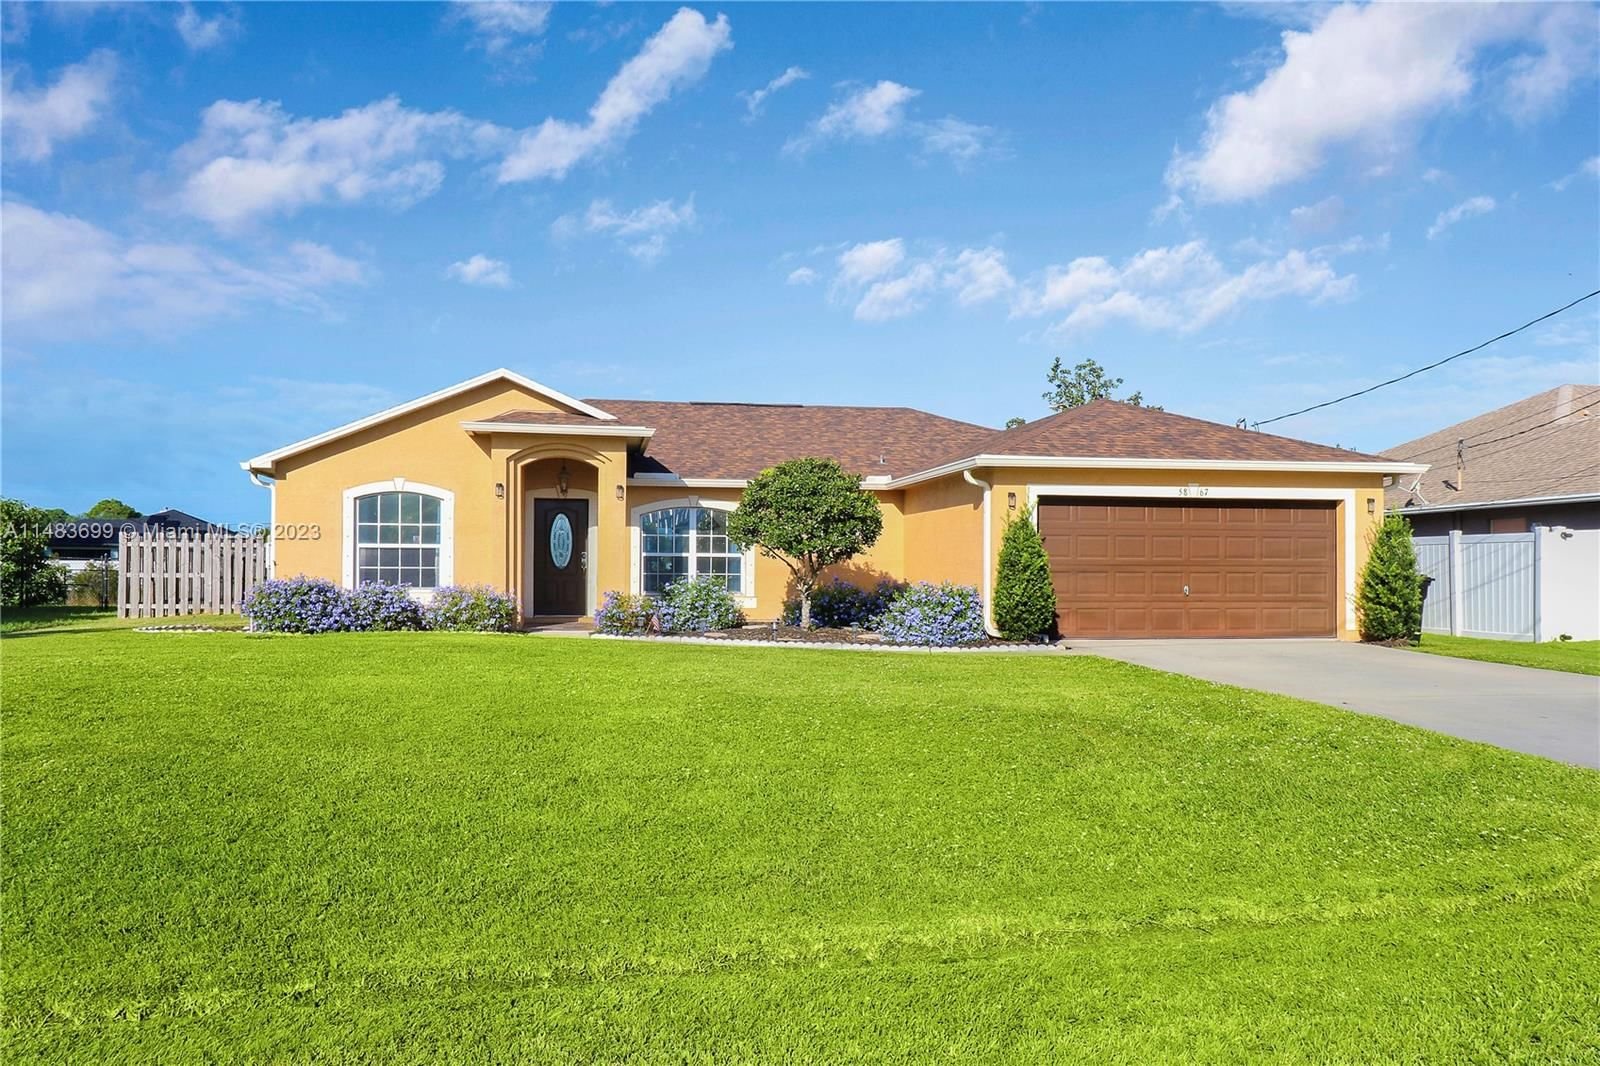 Real estate property located at 5867 Zenith Dr, St Lucie County, PORT ST LUCIE SECTION 44, Port St. Lucie, FL